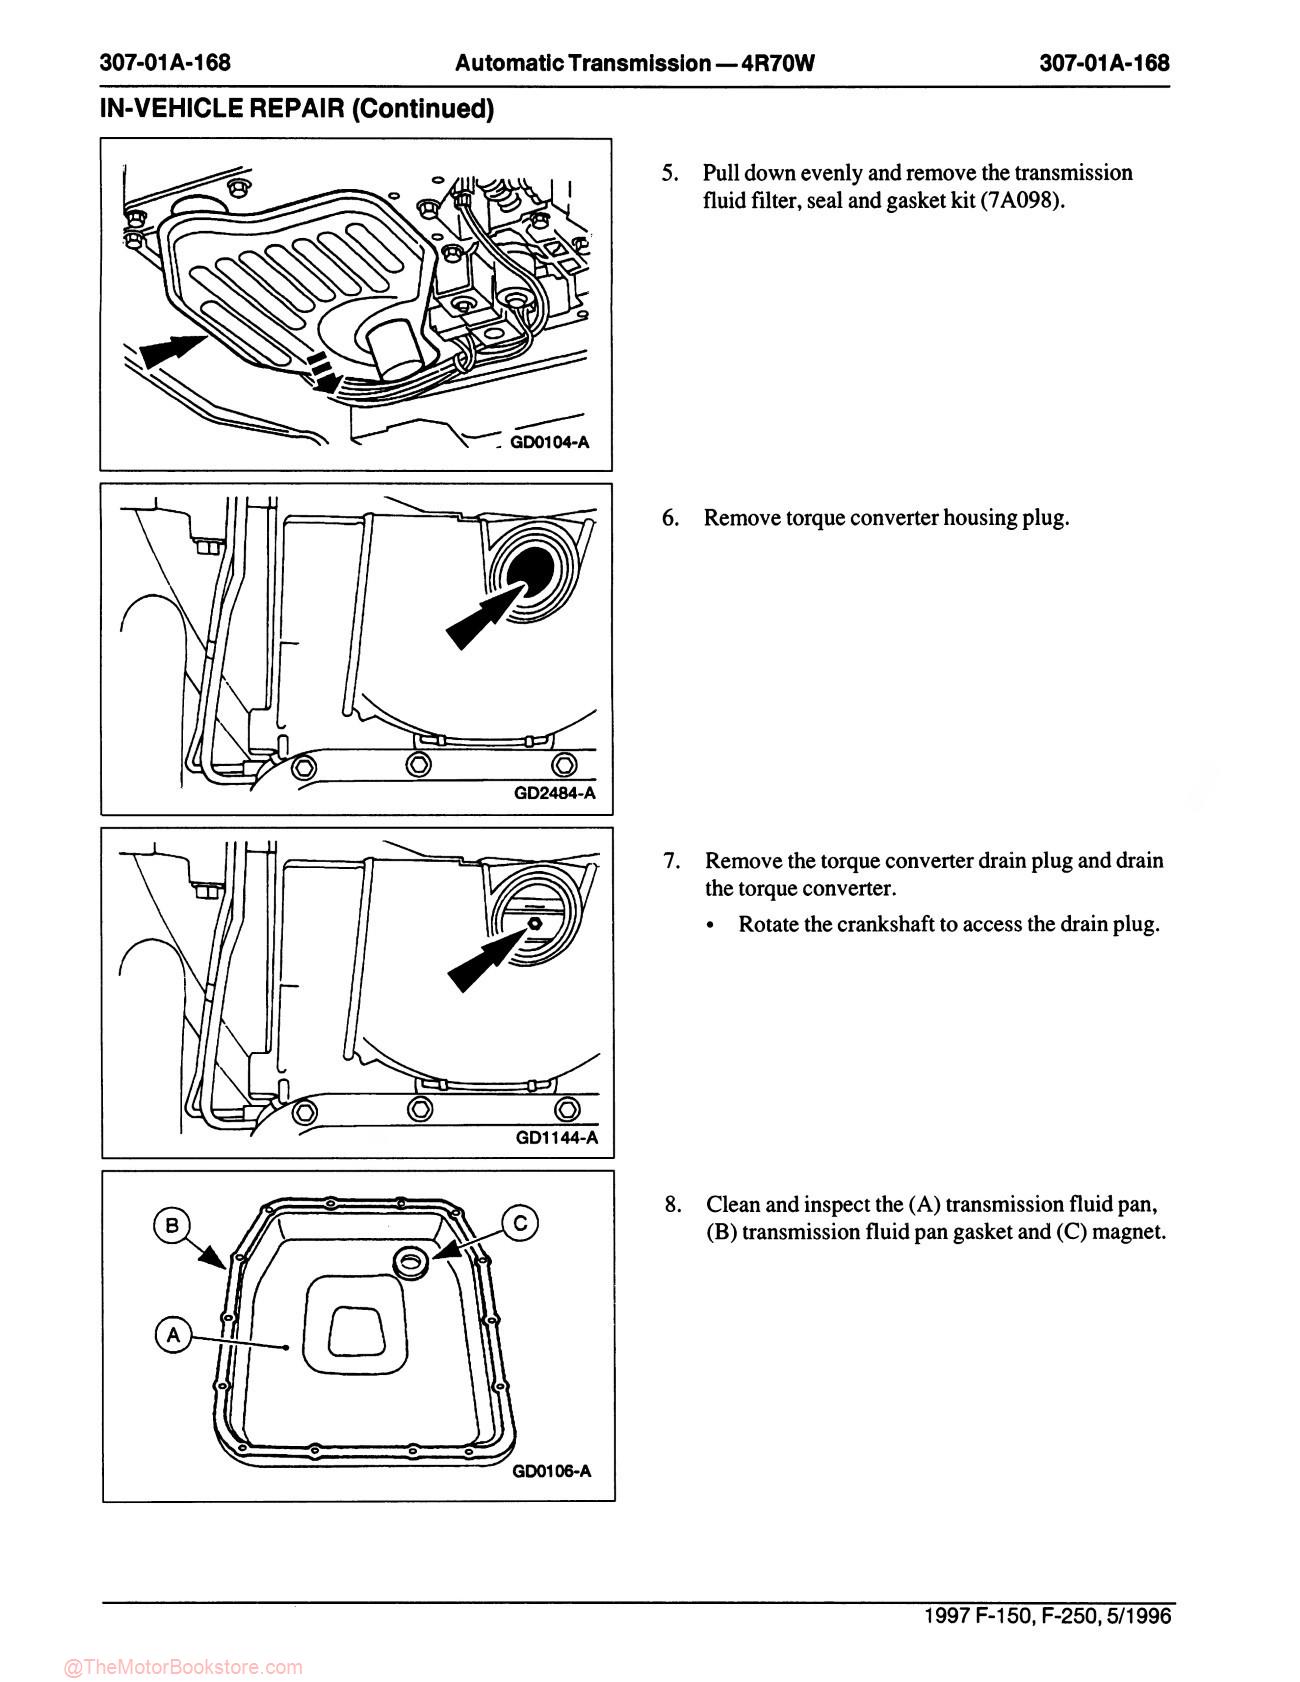 1997 Ford F-150, F-250 Truck Service Manual - Sample Page 3